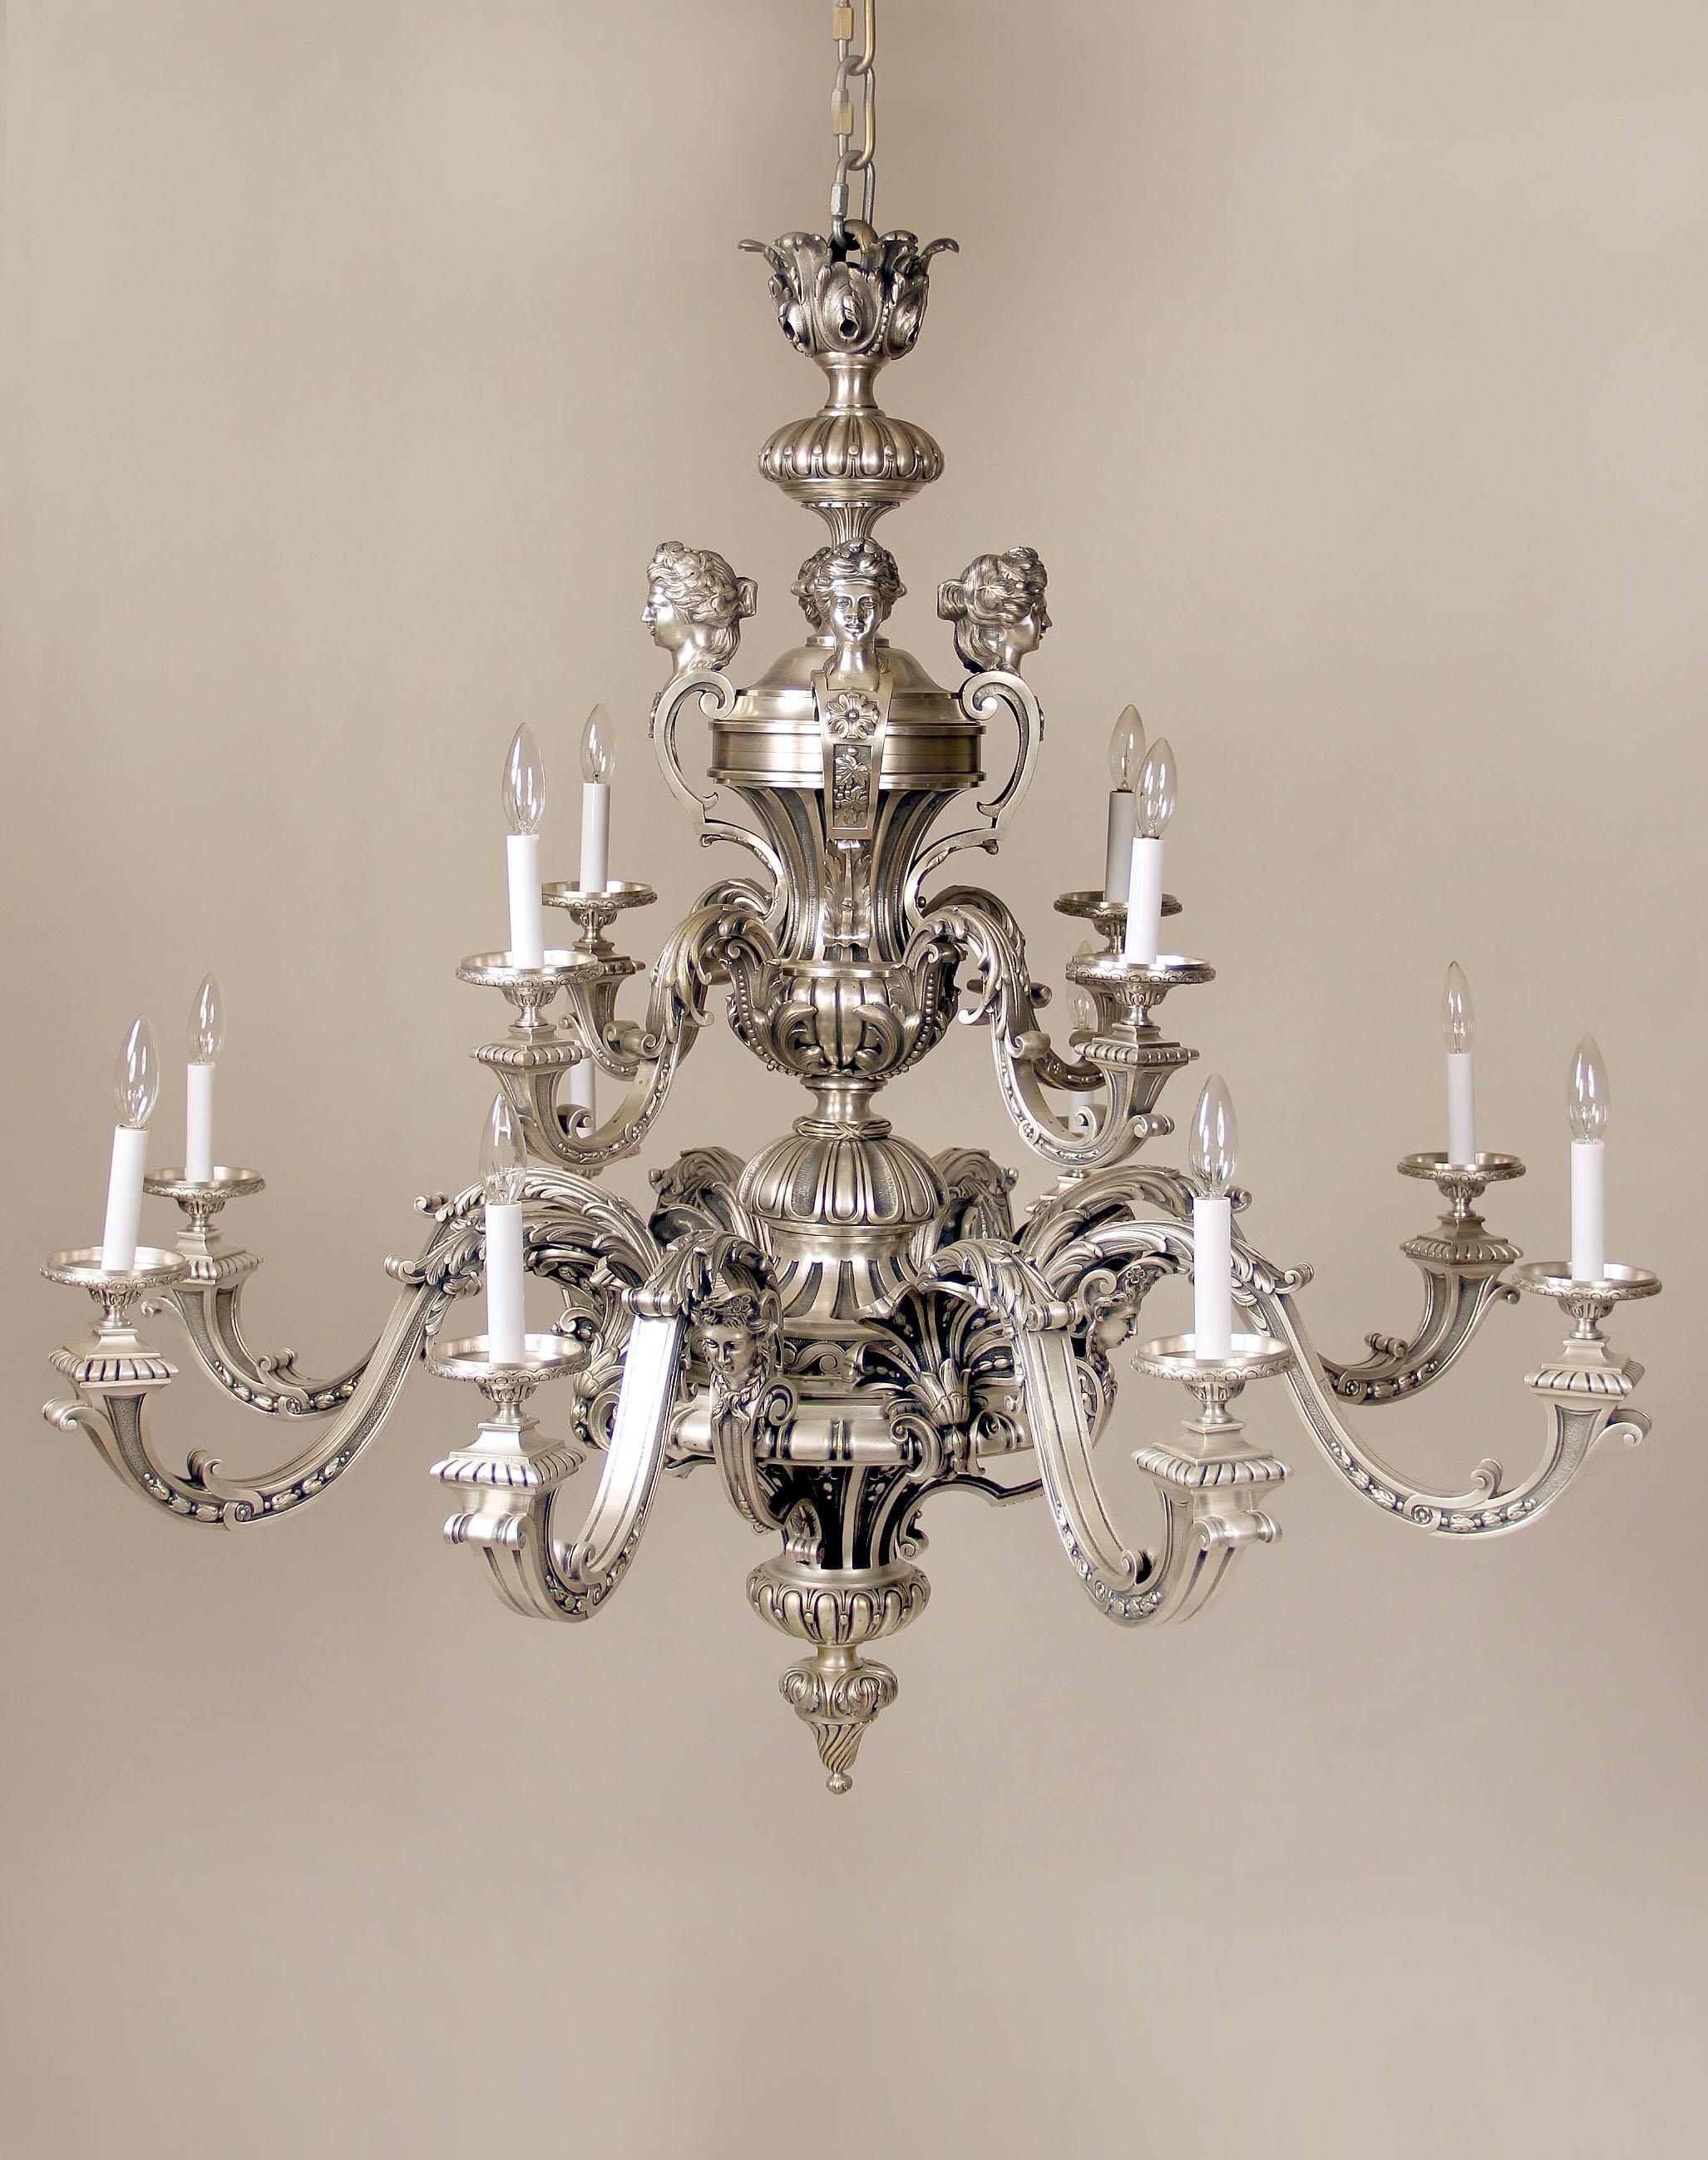 A fantastic late 19th century silvered bronze twelve-light chandelier

Wonderful quality casted frame, the top with women busts, foliage designs along the arms and body, the bottom arms with a flower motif or a female mask, twelve tiered perimeter